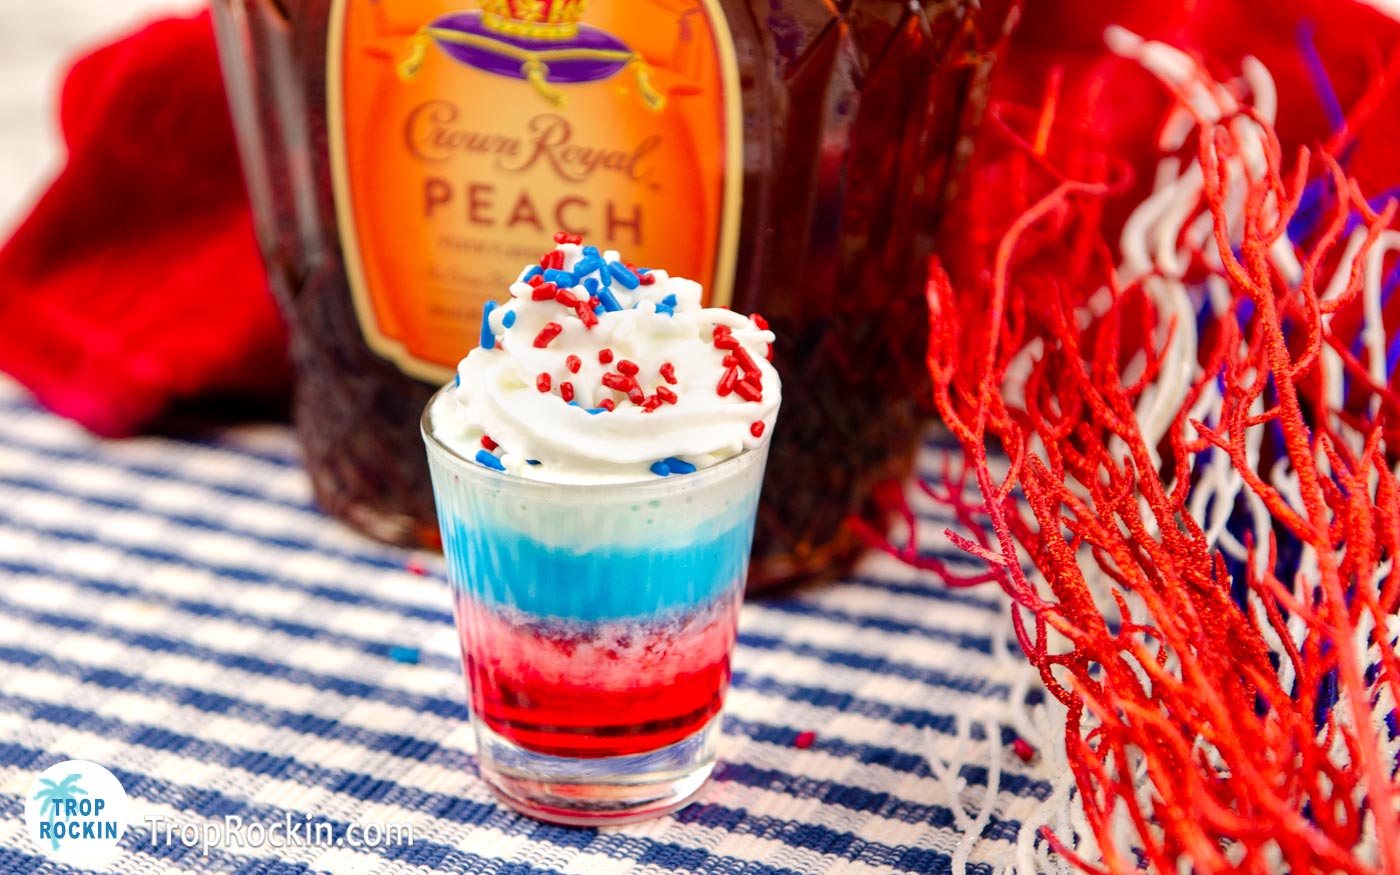 Crown Royal Peach Bottle with Layred Patriotic Shot topped with Whipped Cream and Sprinkles.